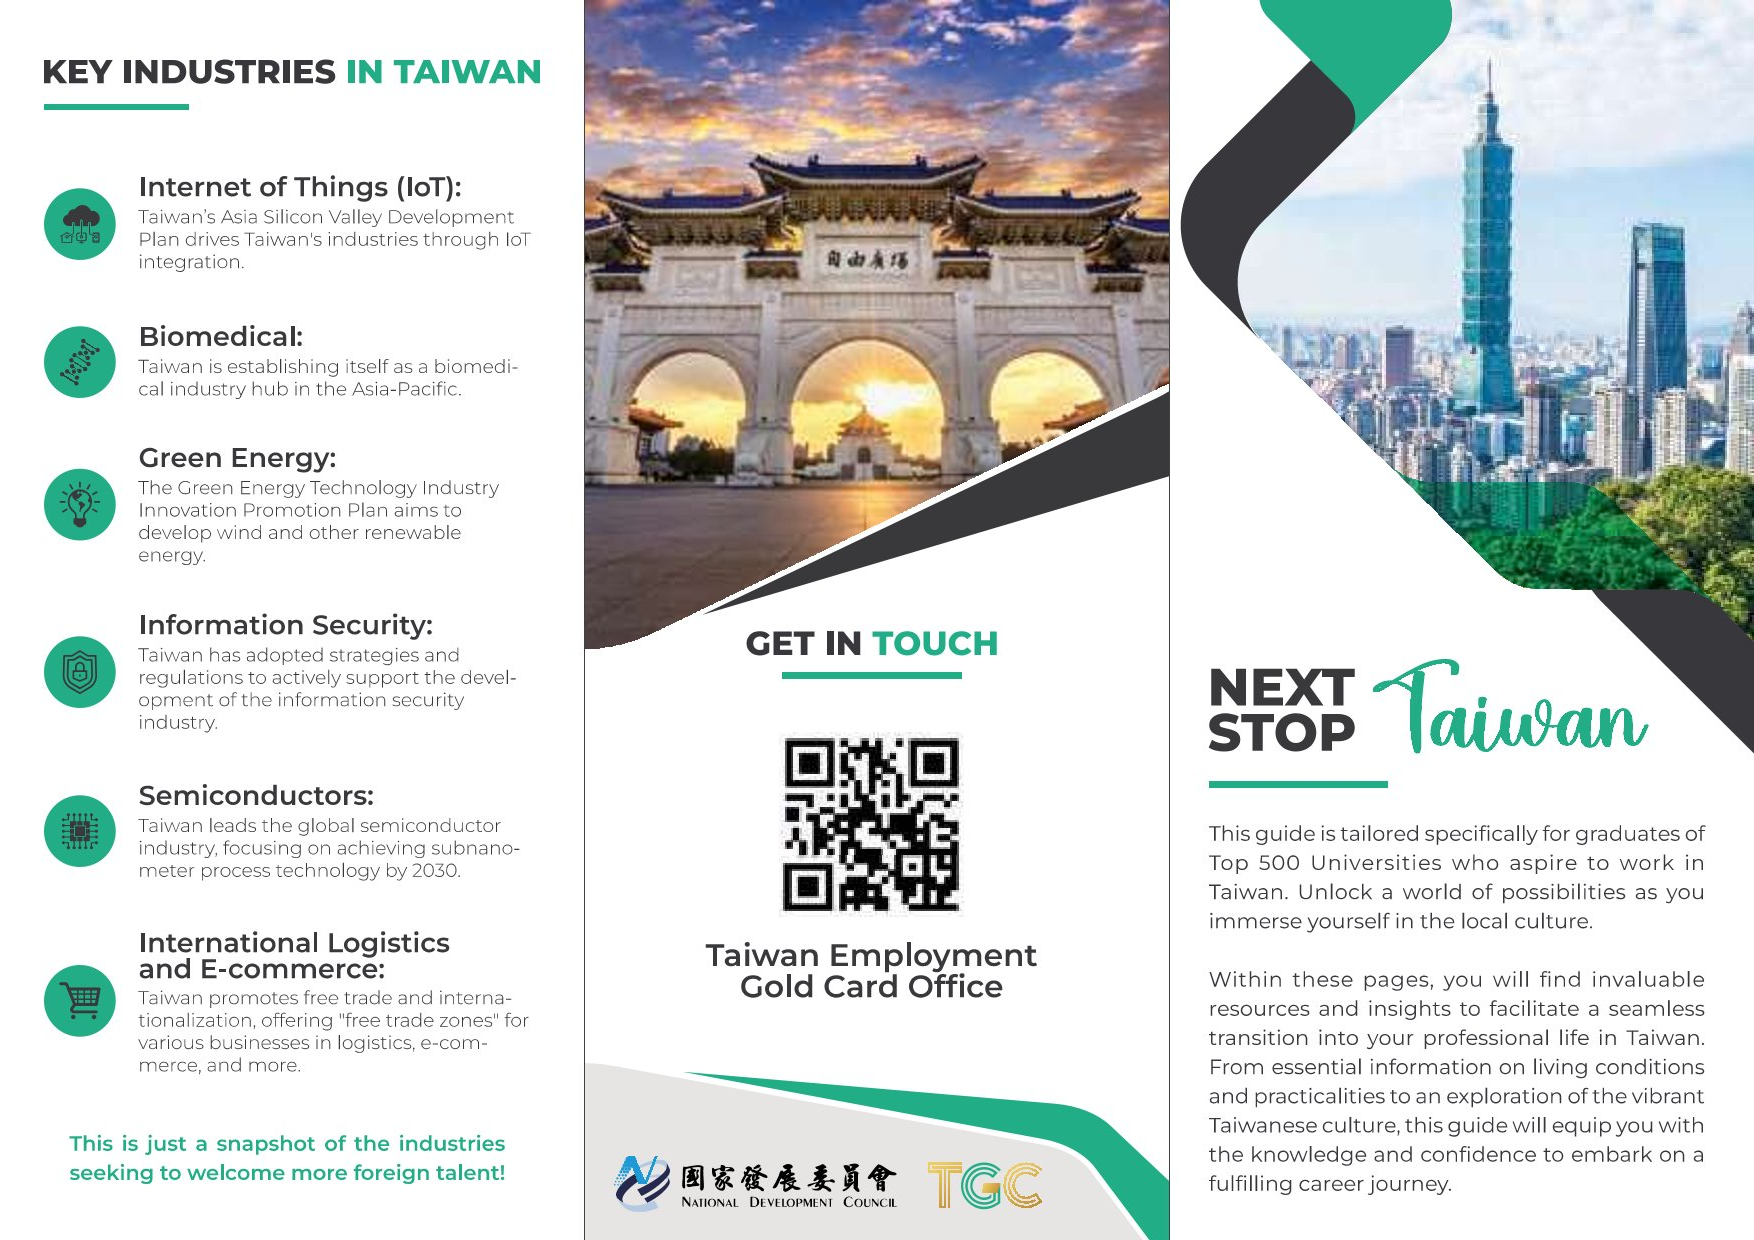 The guide for graduates of Top 500 Universities who aspire to work in Taiwan.